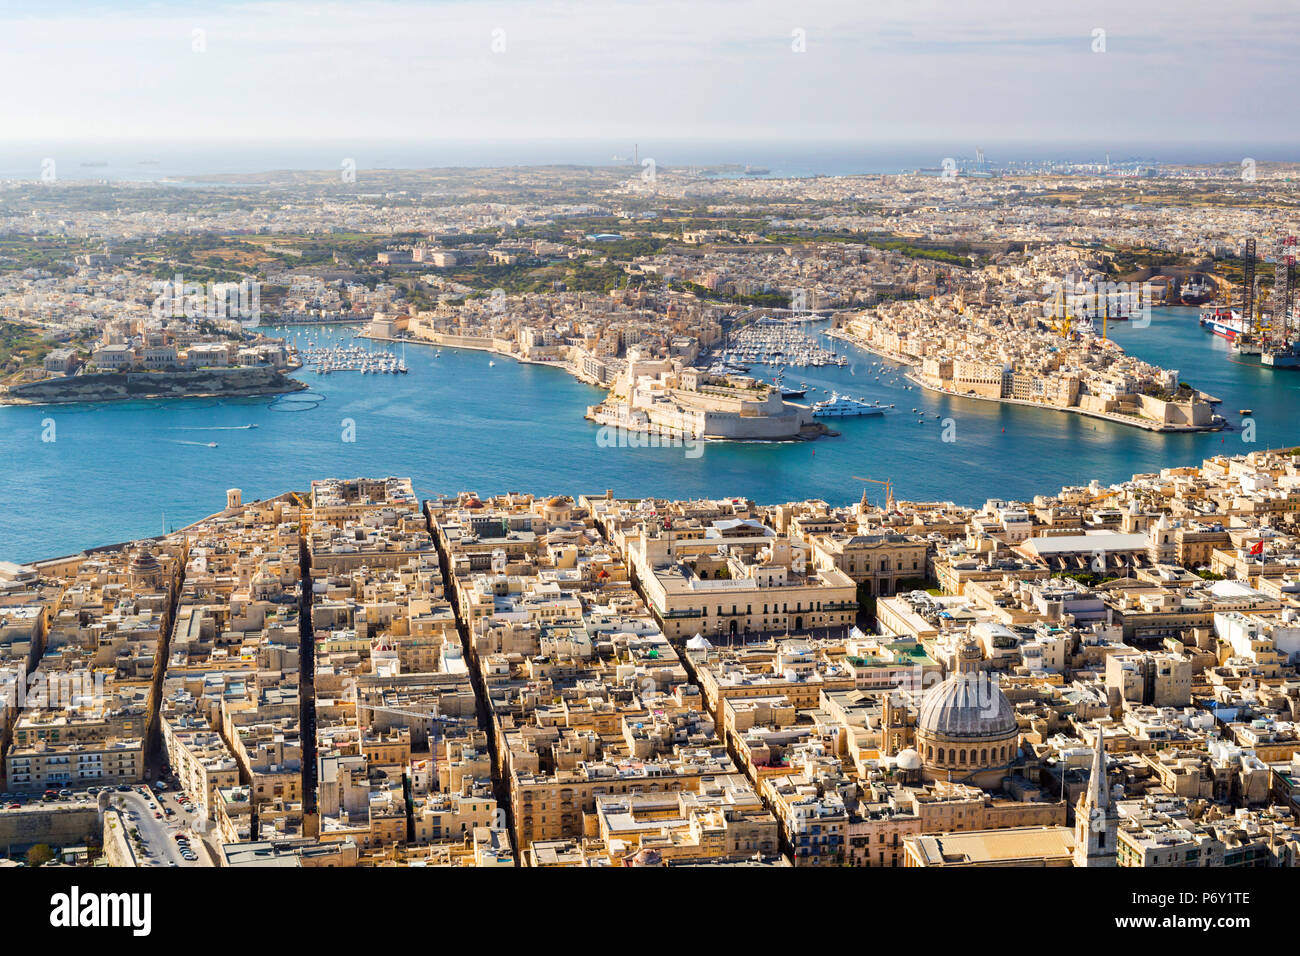 Malta, South Eastern Region, Valletta. Aerial view of Valletta, Grand Harbour and the Three Cities. Stock Photo